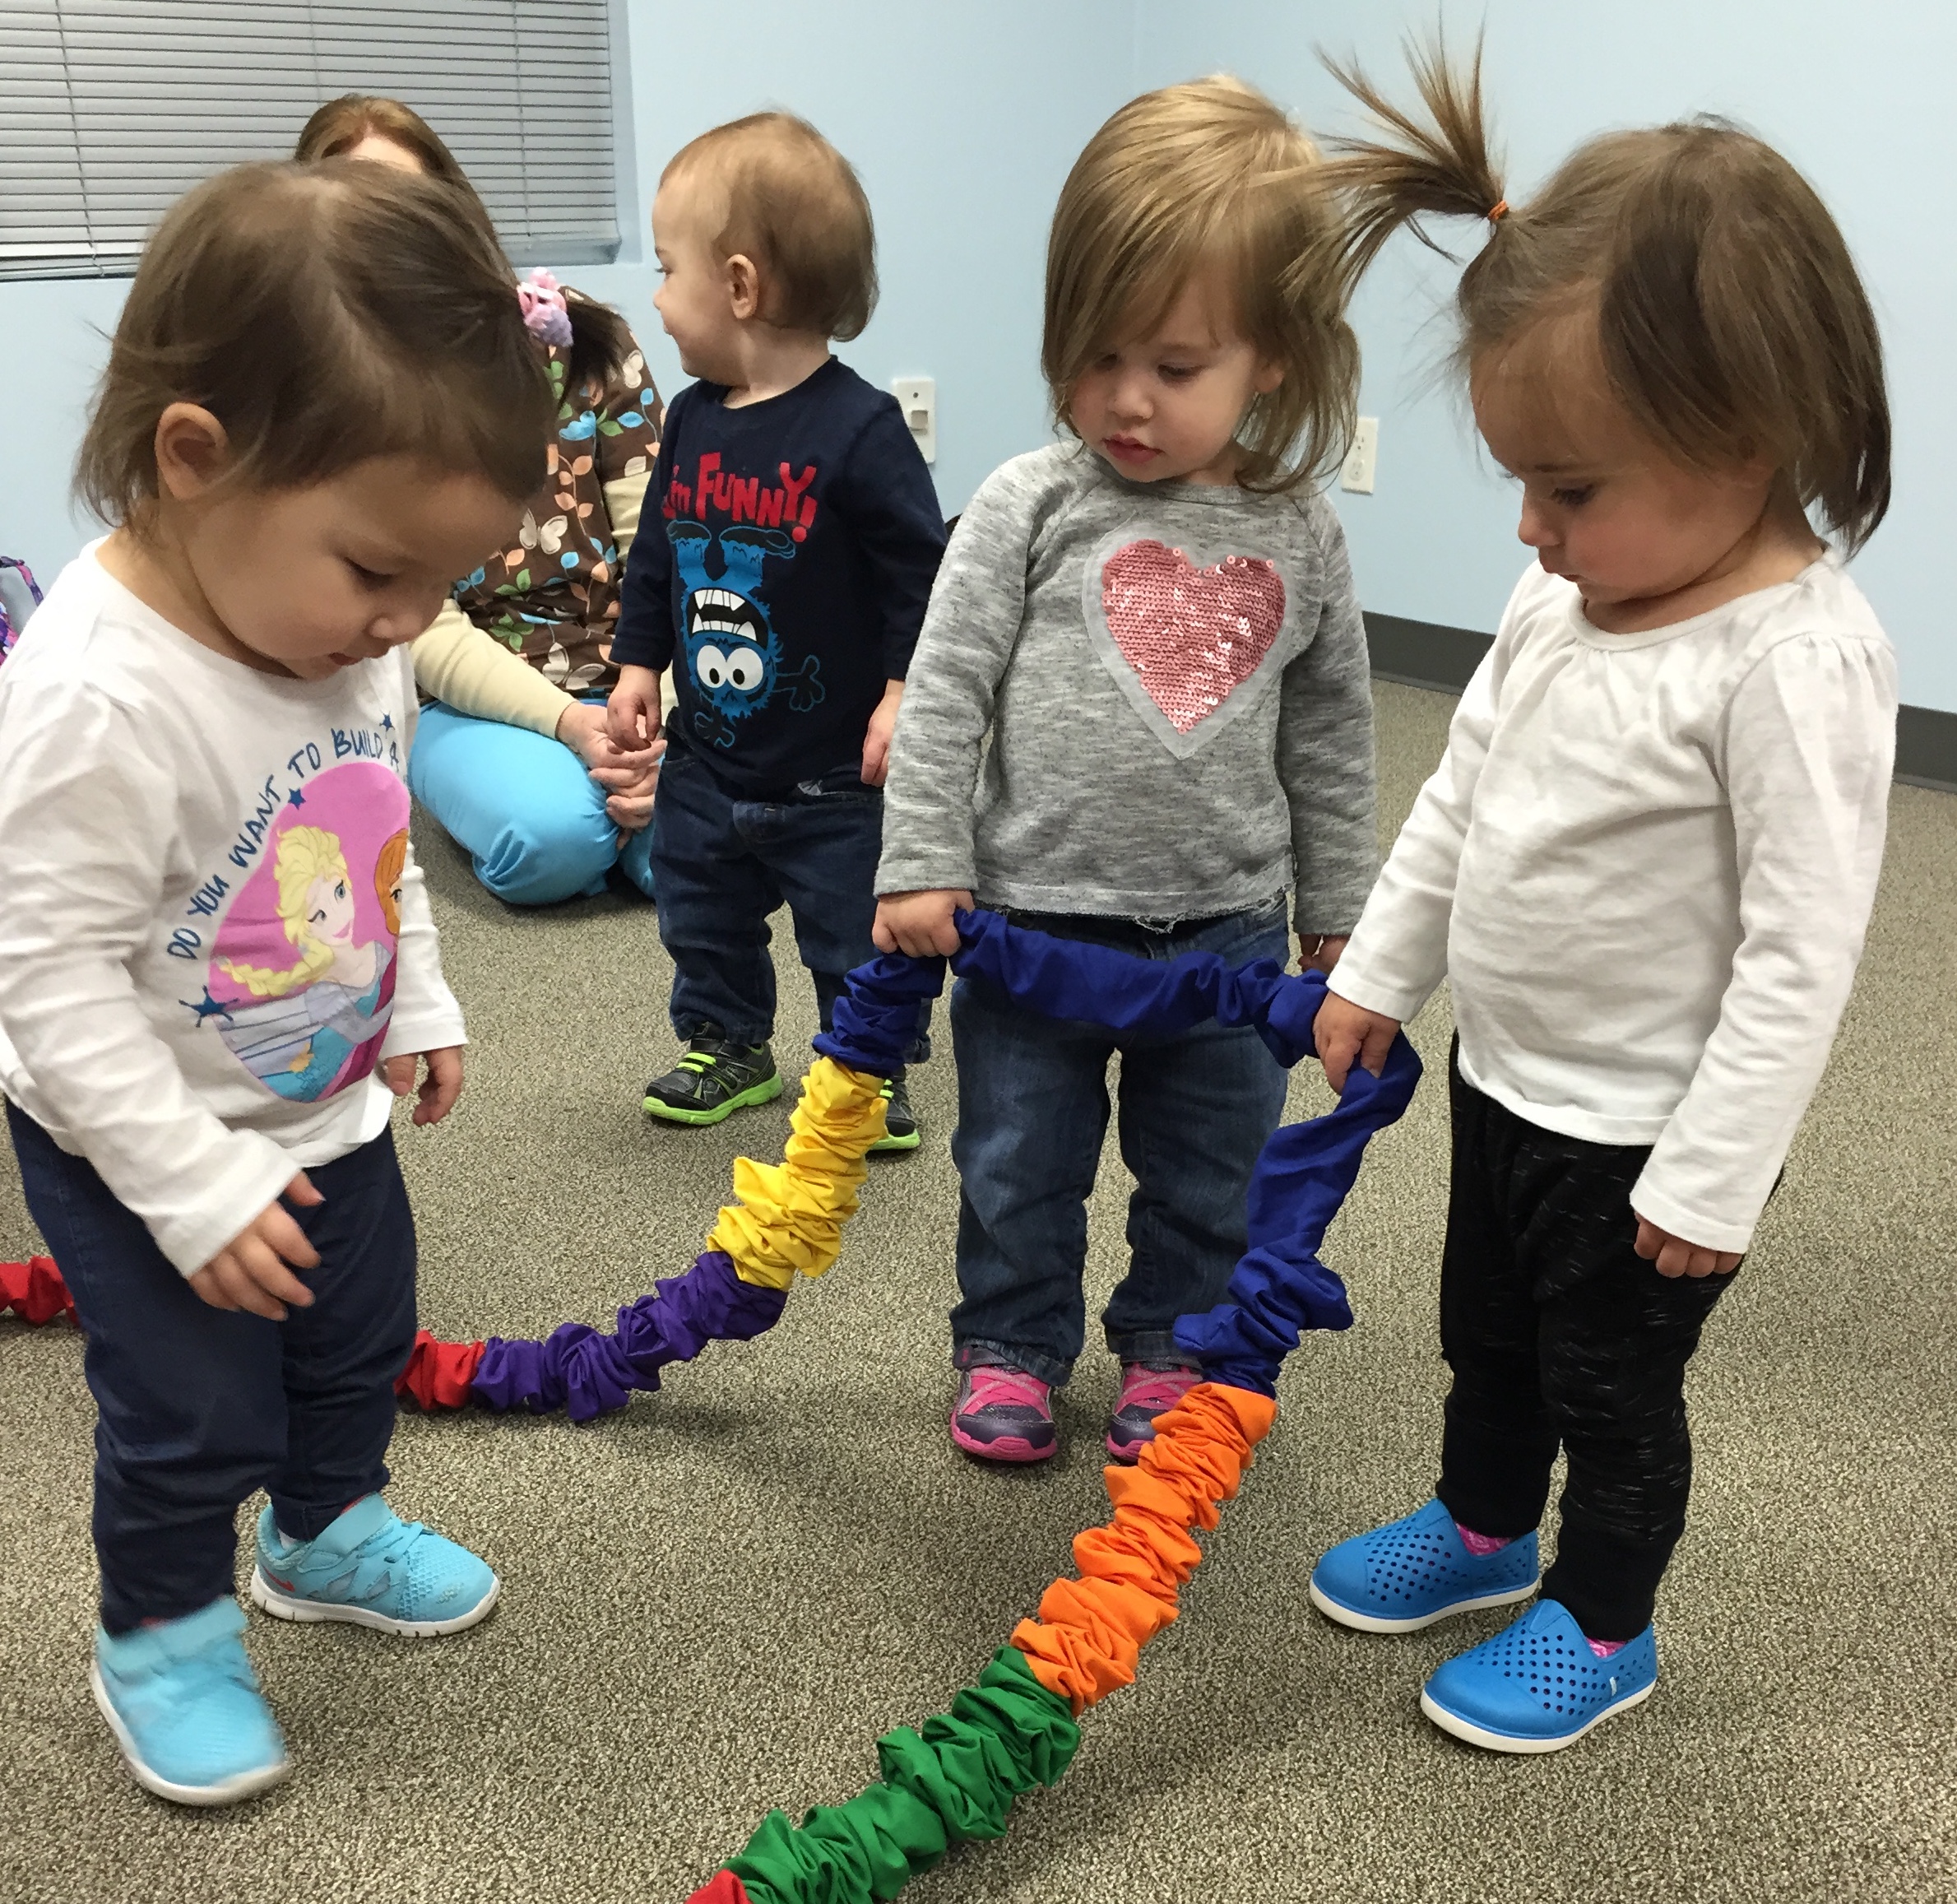 Stretchy Band for Music Therapy, Early Childhood Music, and Learning